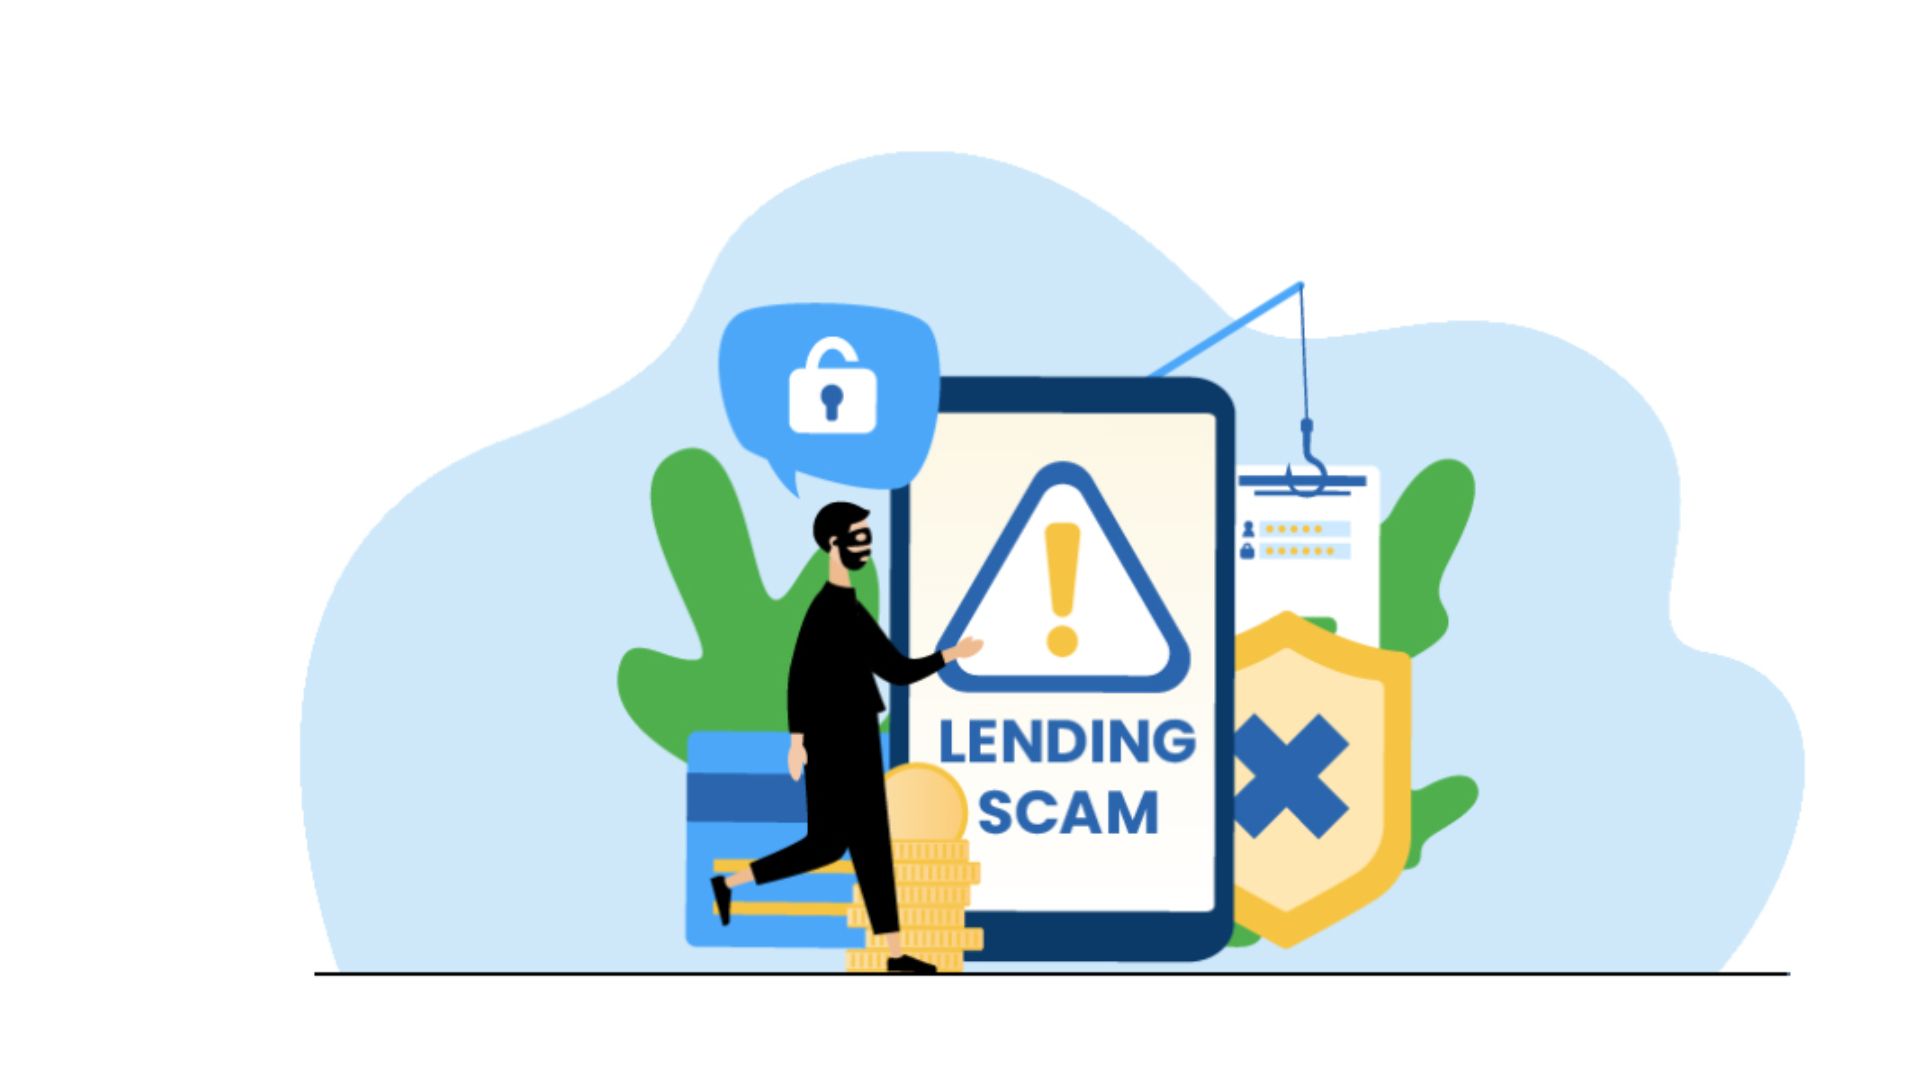 Digital loans : Tips to Steer Clear of Scams and Unfair Practices